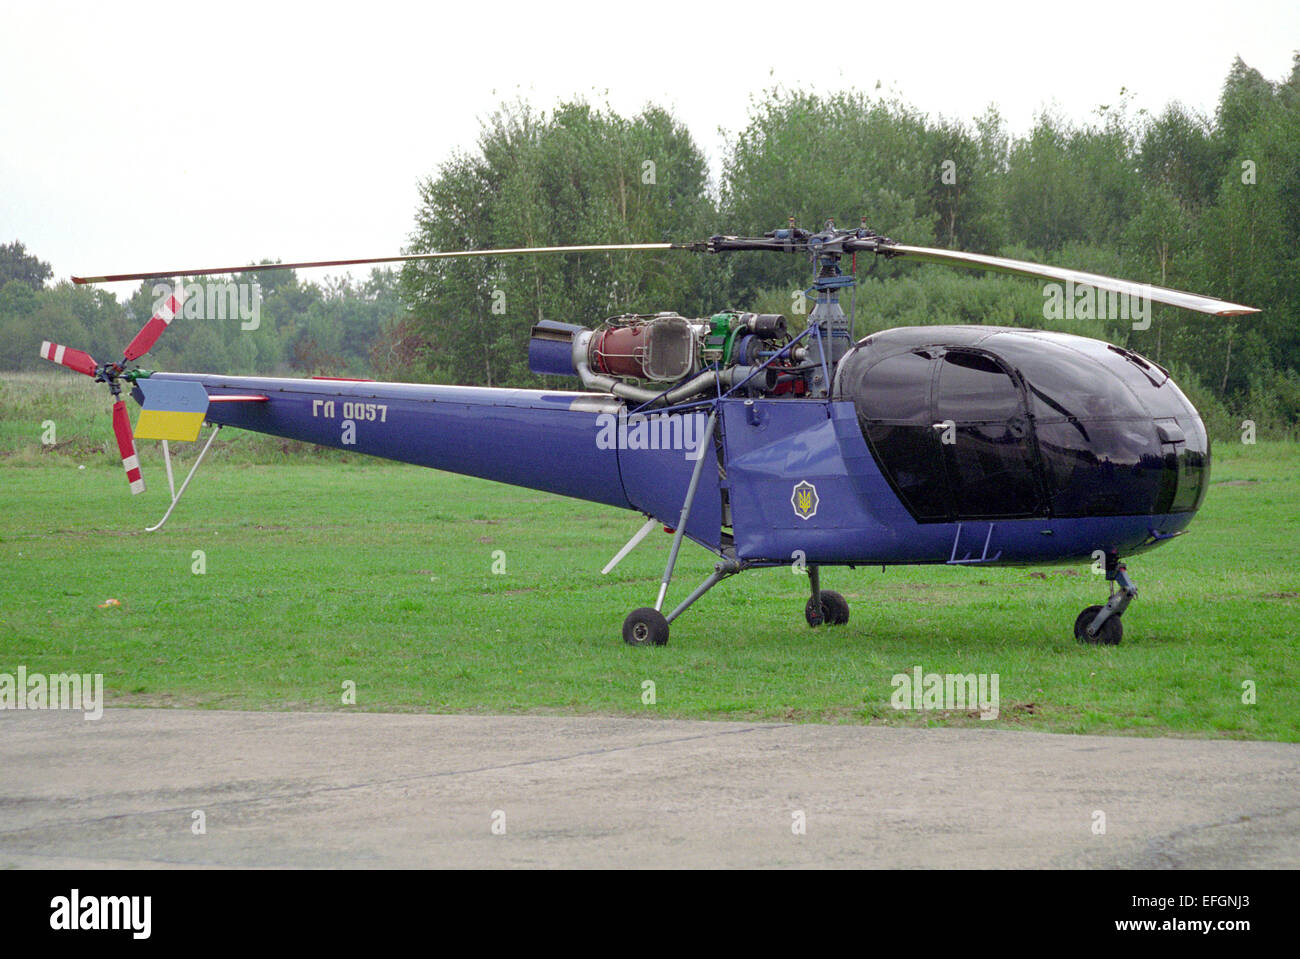 Sud-Aviation SA-316B Alouette III helicopter Banque D'Images